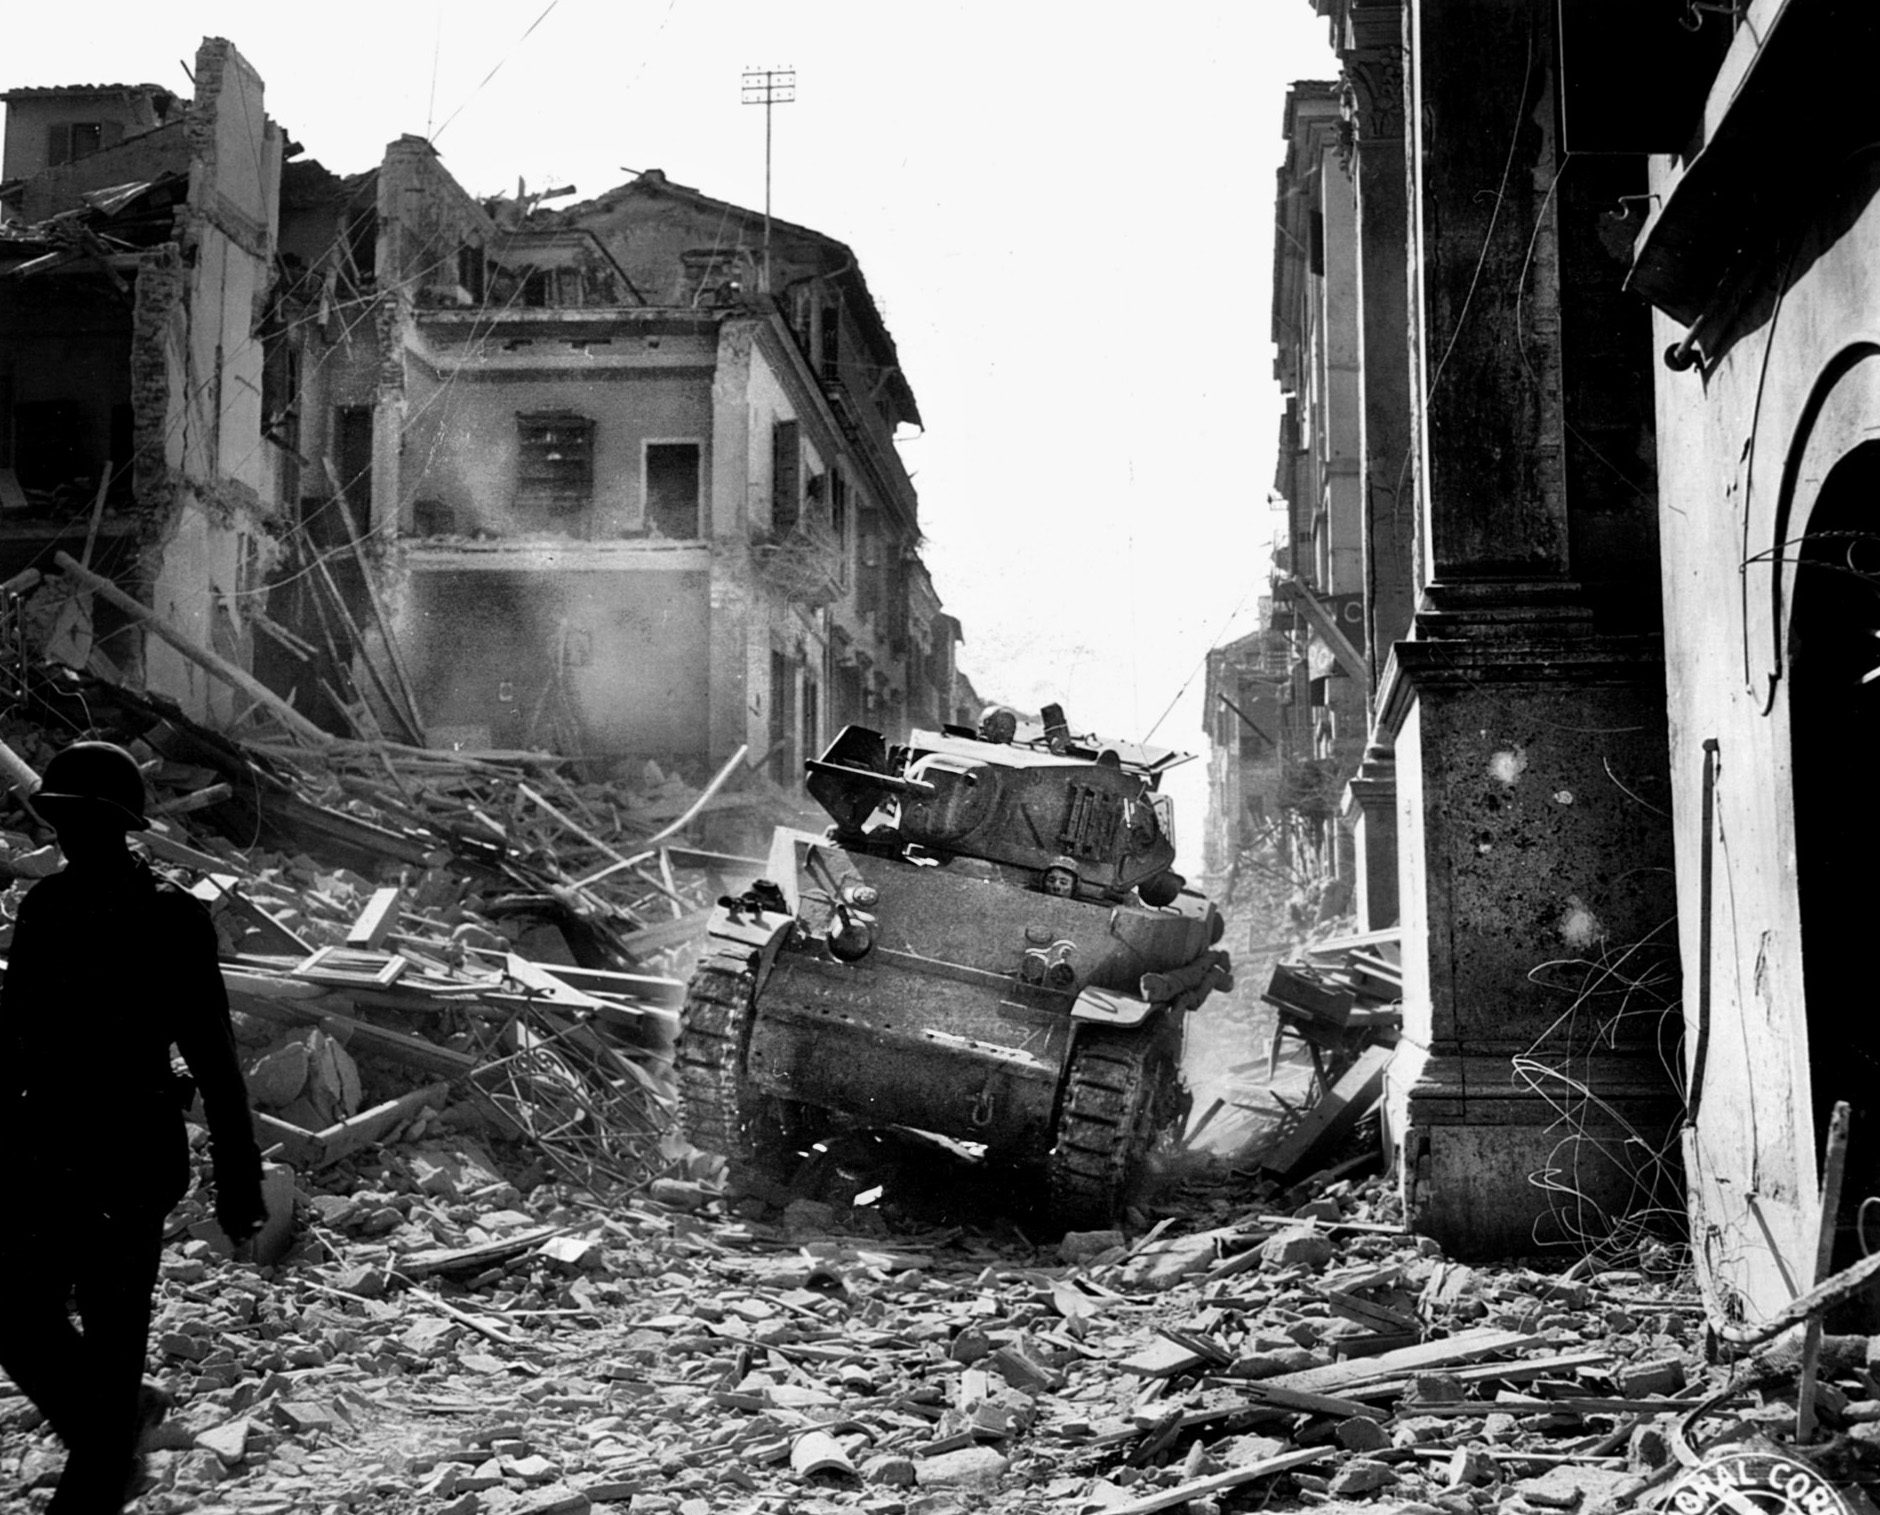 A Stuart tank of the 1st Armored Division traverses a rubble-strewn street in Italy while probing for enemy positions. 